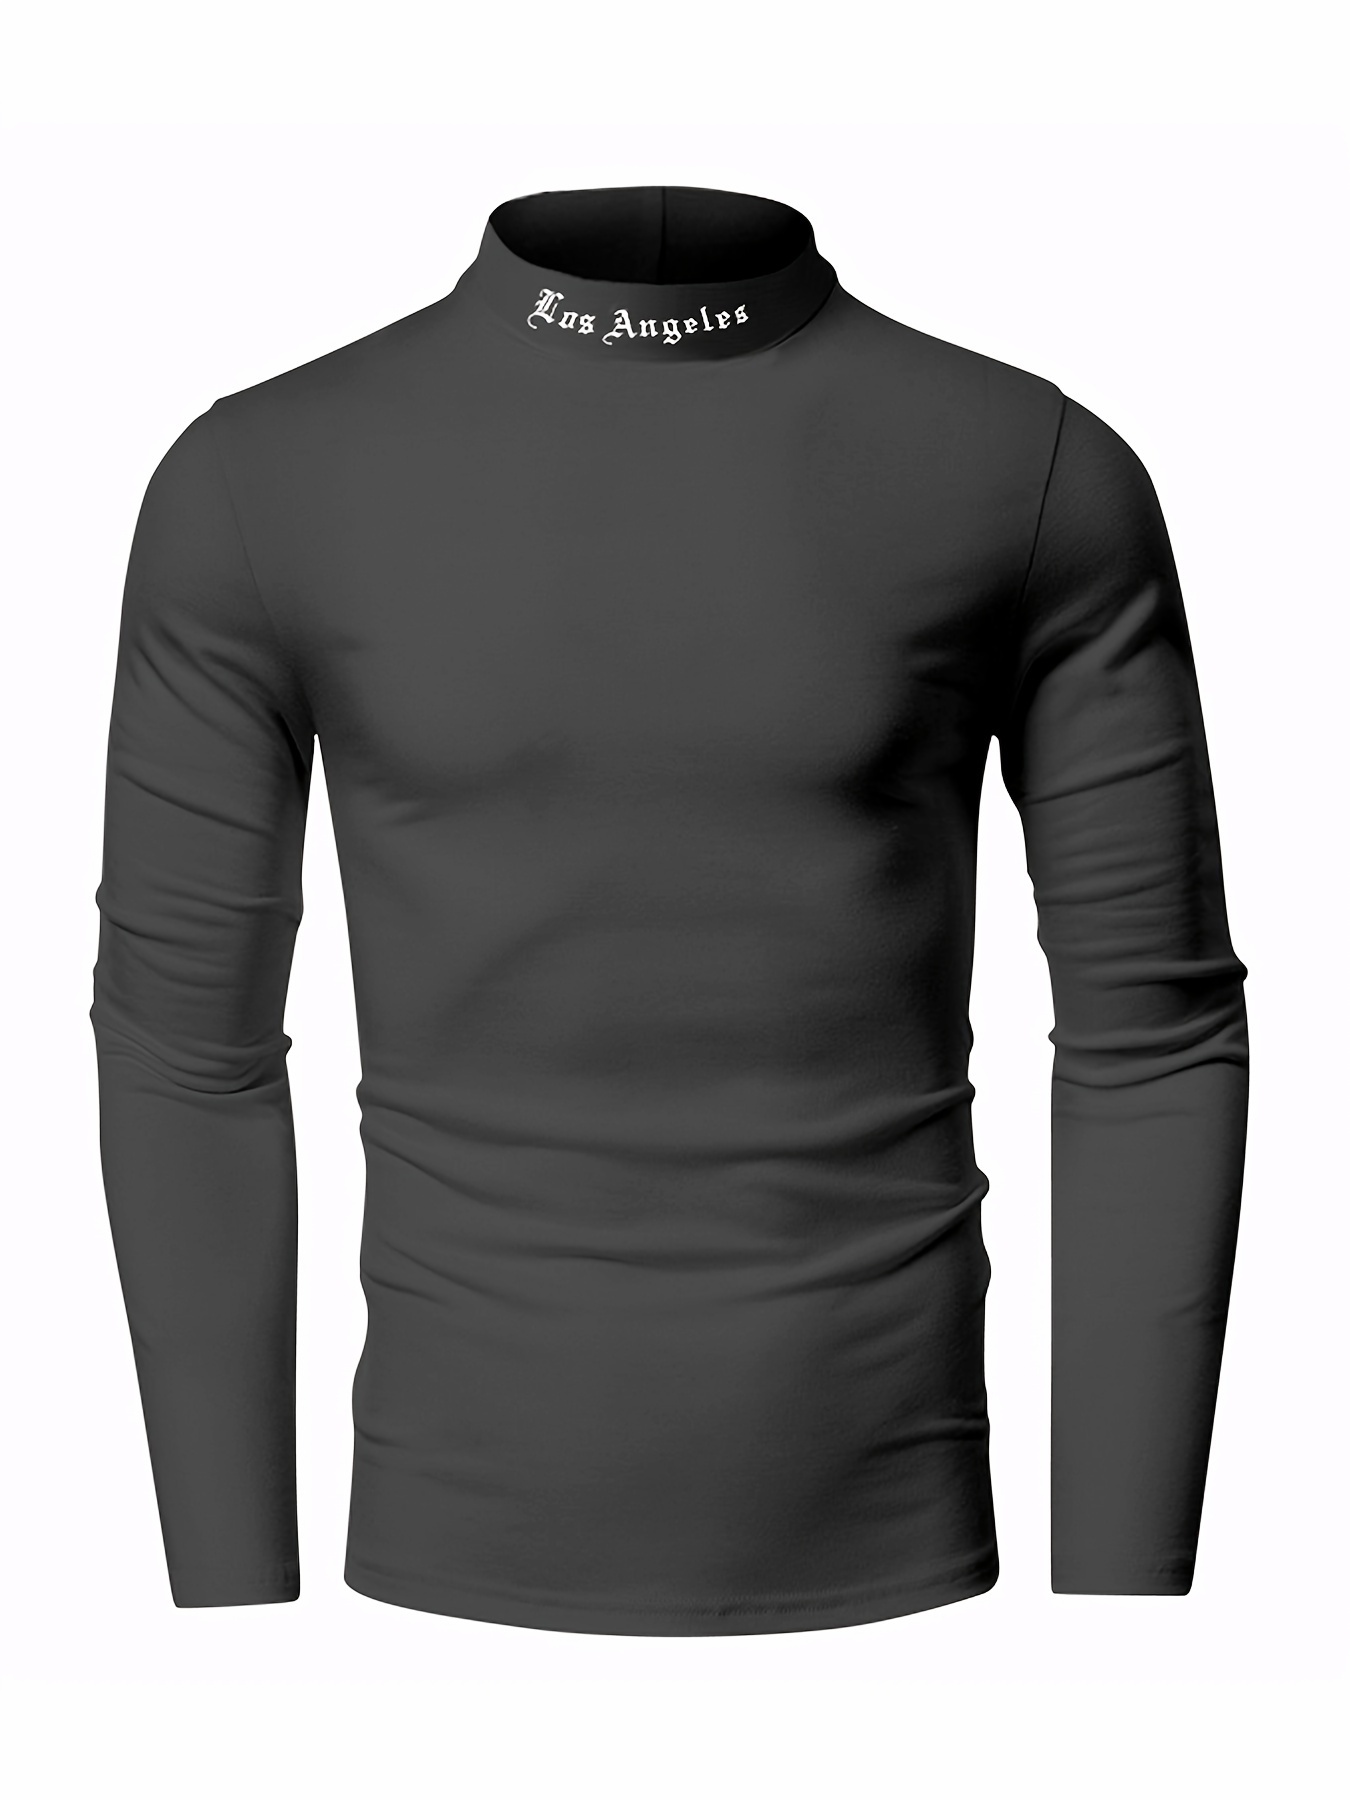 2DXuixsh Pack Of Turtle Neck Top for Men Mens Fashion Cotton T Shirt Sports  Ffitness Outdoor Solid T Shirt Tight Long Sleeve Shirt Space Apparel Cotton  Black L 